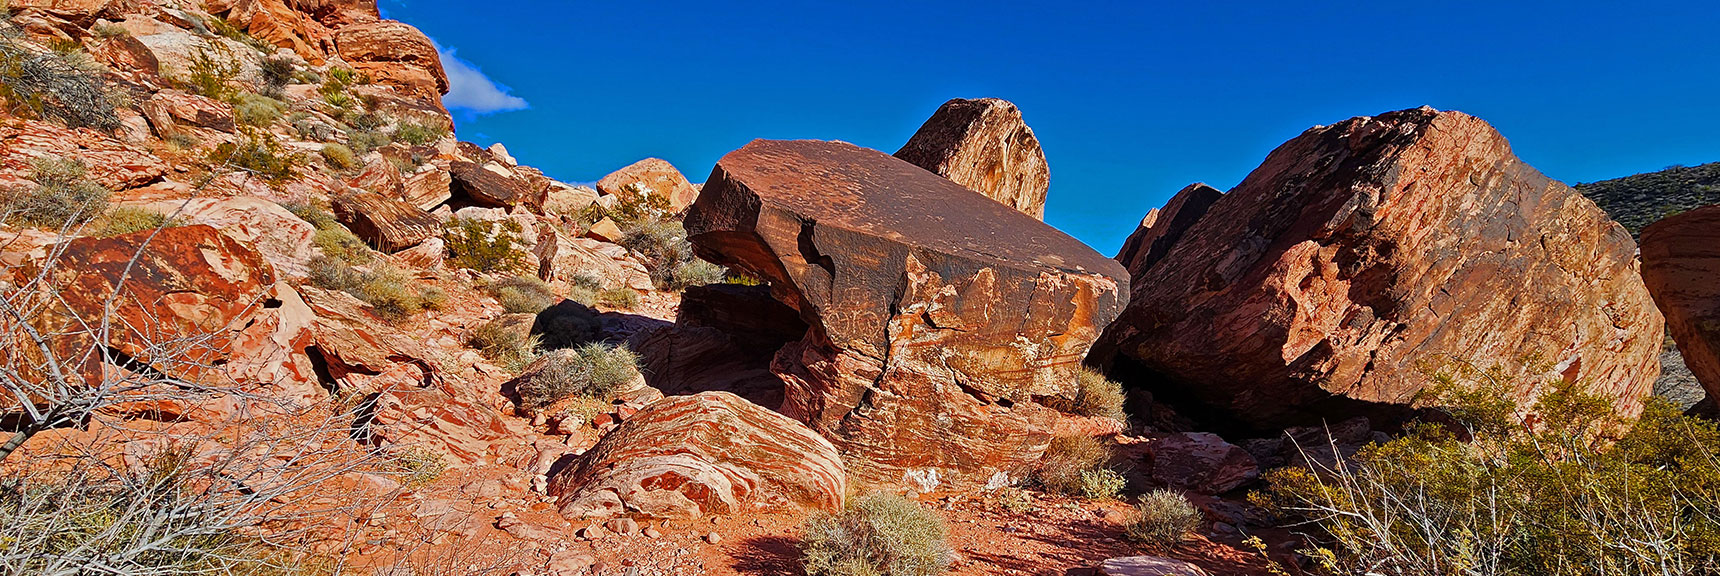 A Petroglyph Rock Ahead. Petroglyphs on Upper Face | Lower Calico Hills Loop | Calico Basin & Red Rock Canyon, Nevada